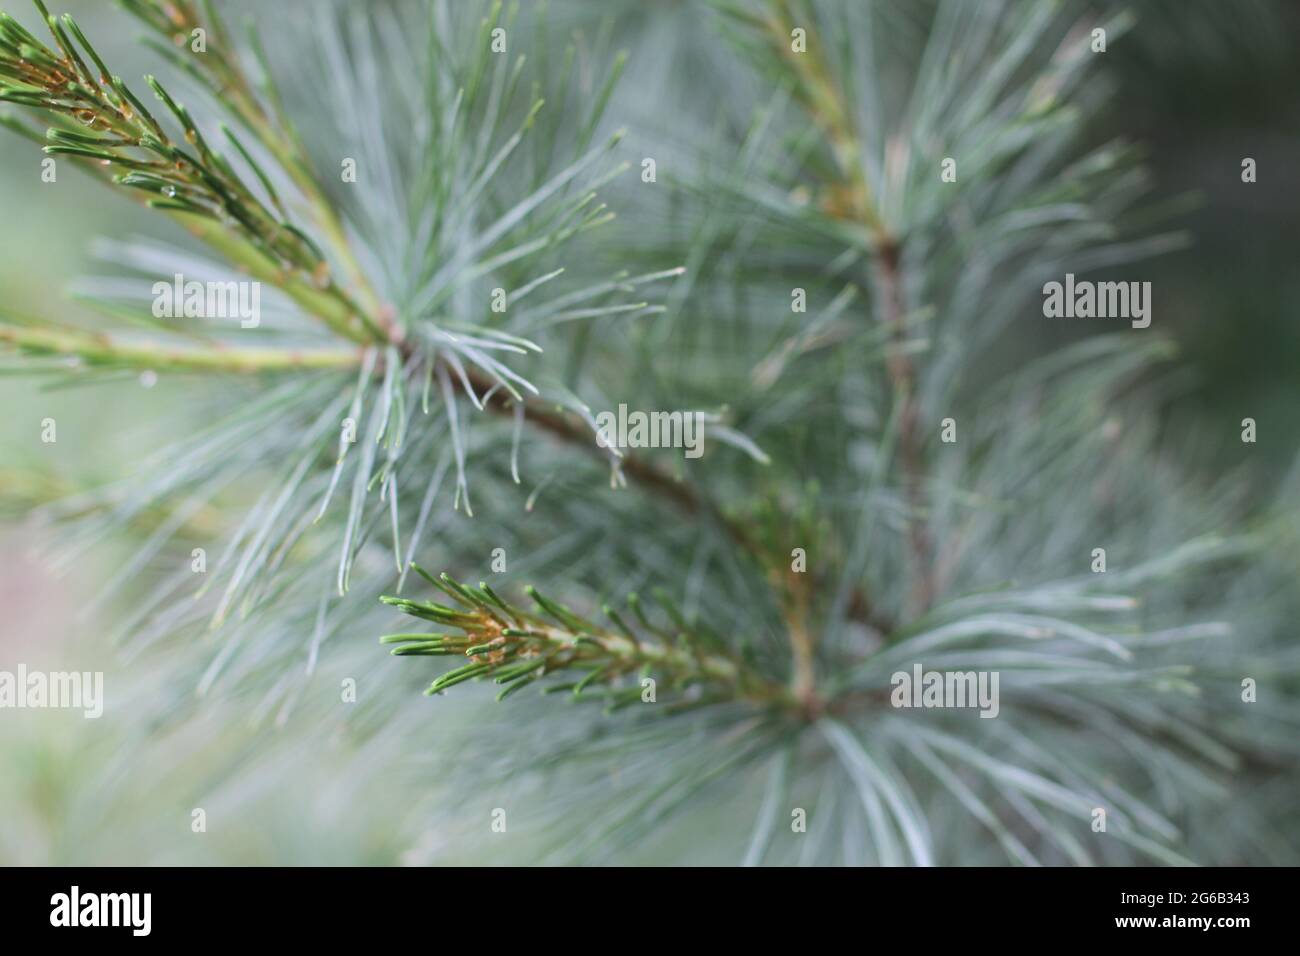 Closeup of tips of pine tree branches Stock Photo